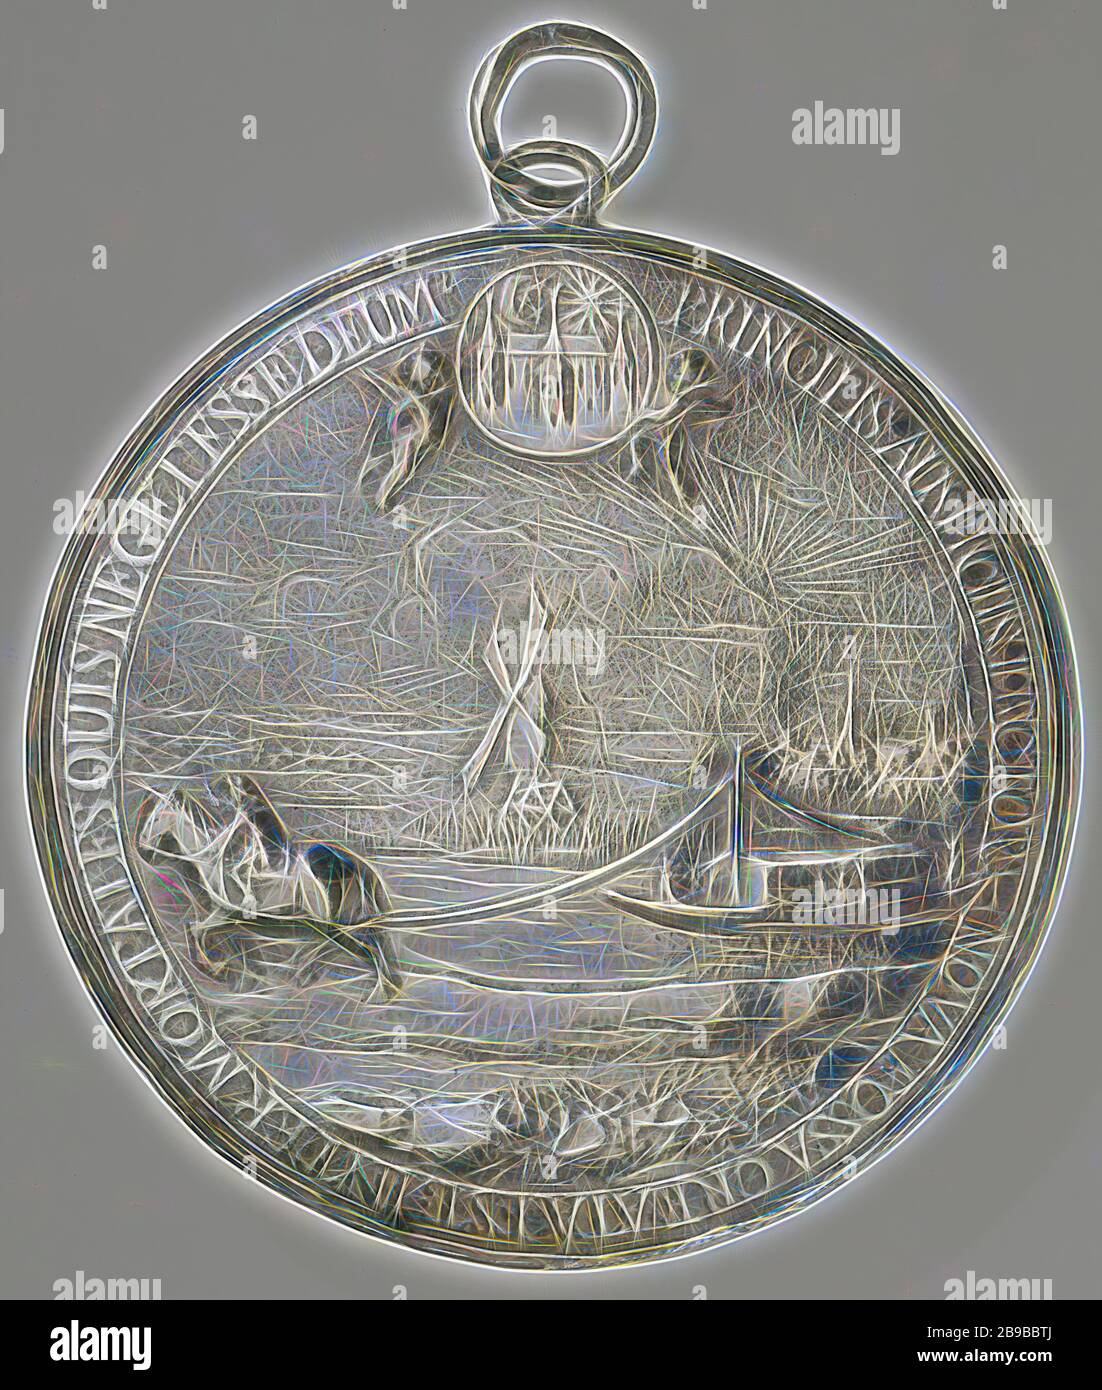 Construction of the hike from Dokkum to Groningen, Silver Medal. Obverse: under bats of arms worn by two angels, the tow barge is pulled by the horse within the inscription. Reverse: inscription inside a coat of arms worn by two angels, Dokkum, Groningen, Stroobossertrekvaart, Johannes Lutma (1624-1689), 1656, silver (metal), founding, h 9.2 cm × h 8.2 cm × w 7.6 cm × t 0.6 cm × w 96.55 gr, Reimagined by Gibon, design of warm cheerful glowing of brightness and light rays radiance. Classic art reinvented with a modern twist. Photography inspired by futurism, embracing dynamic energy of modern t Stock Photo